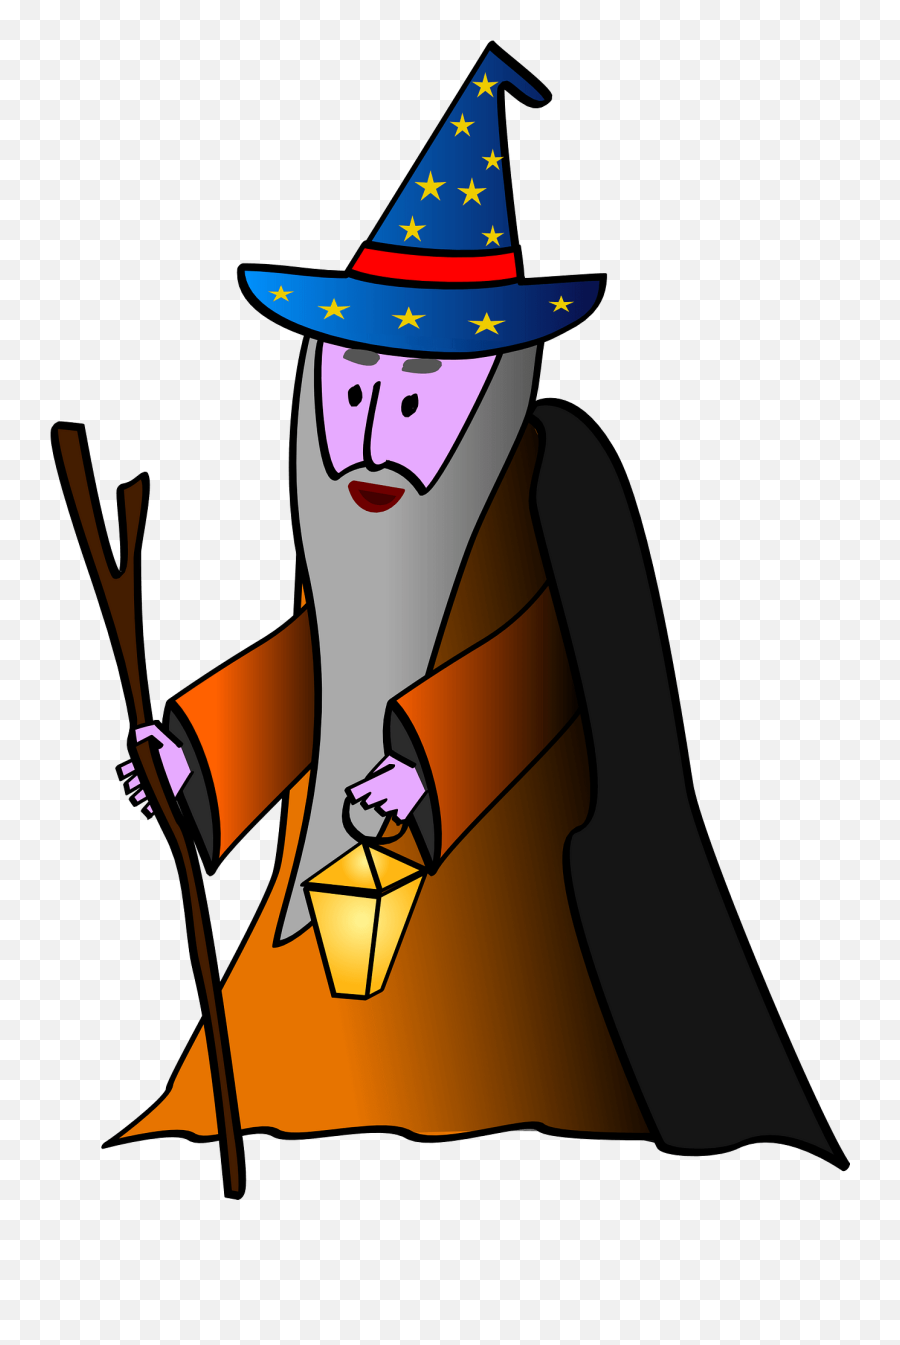 Old Wizard With A Cane And Lantern Clipart Free Download - Clip Art Emoji,Old Man With Cane Emoji